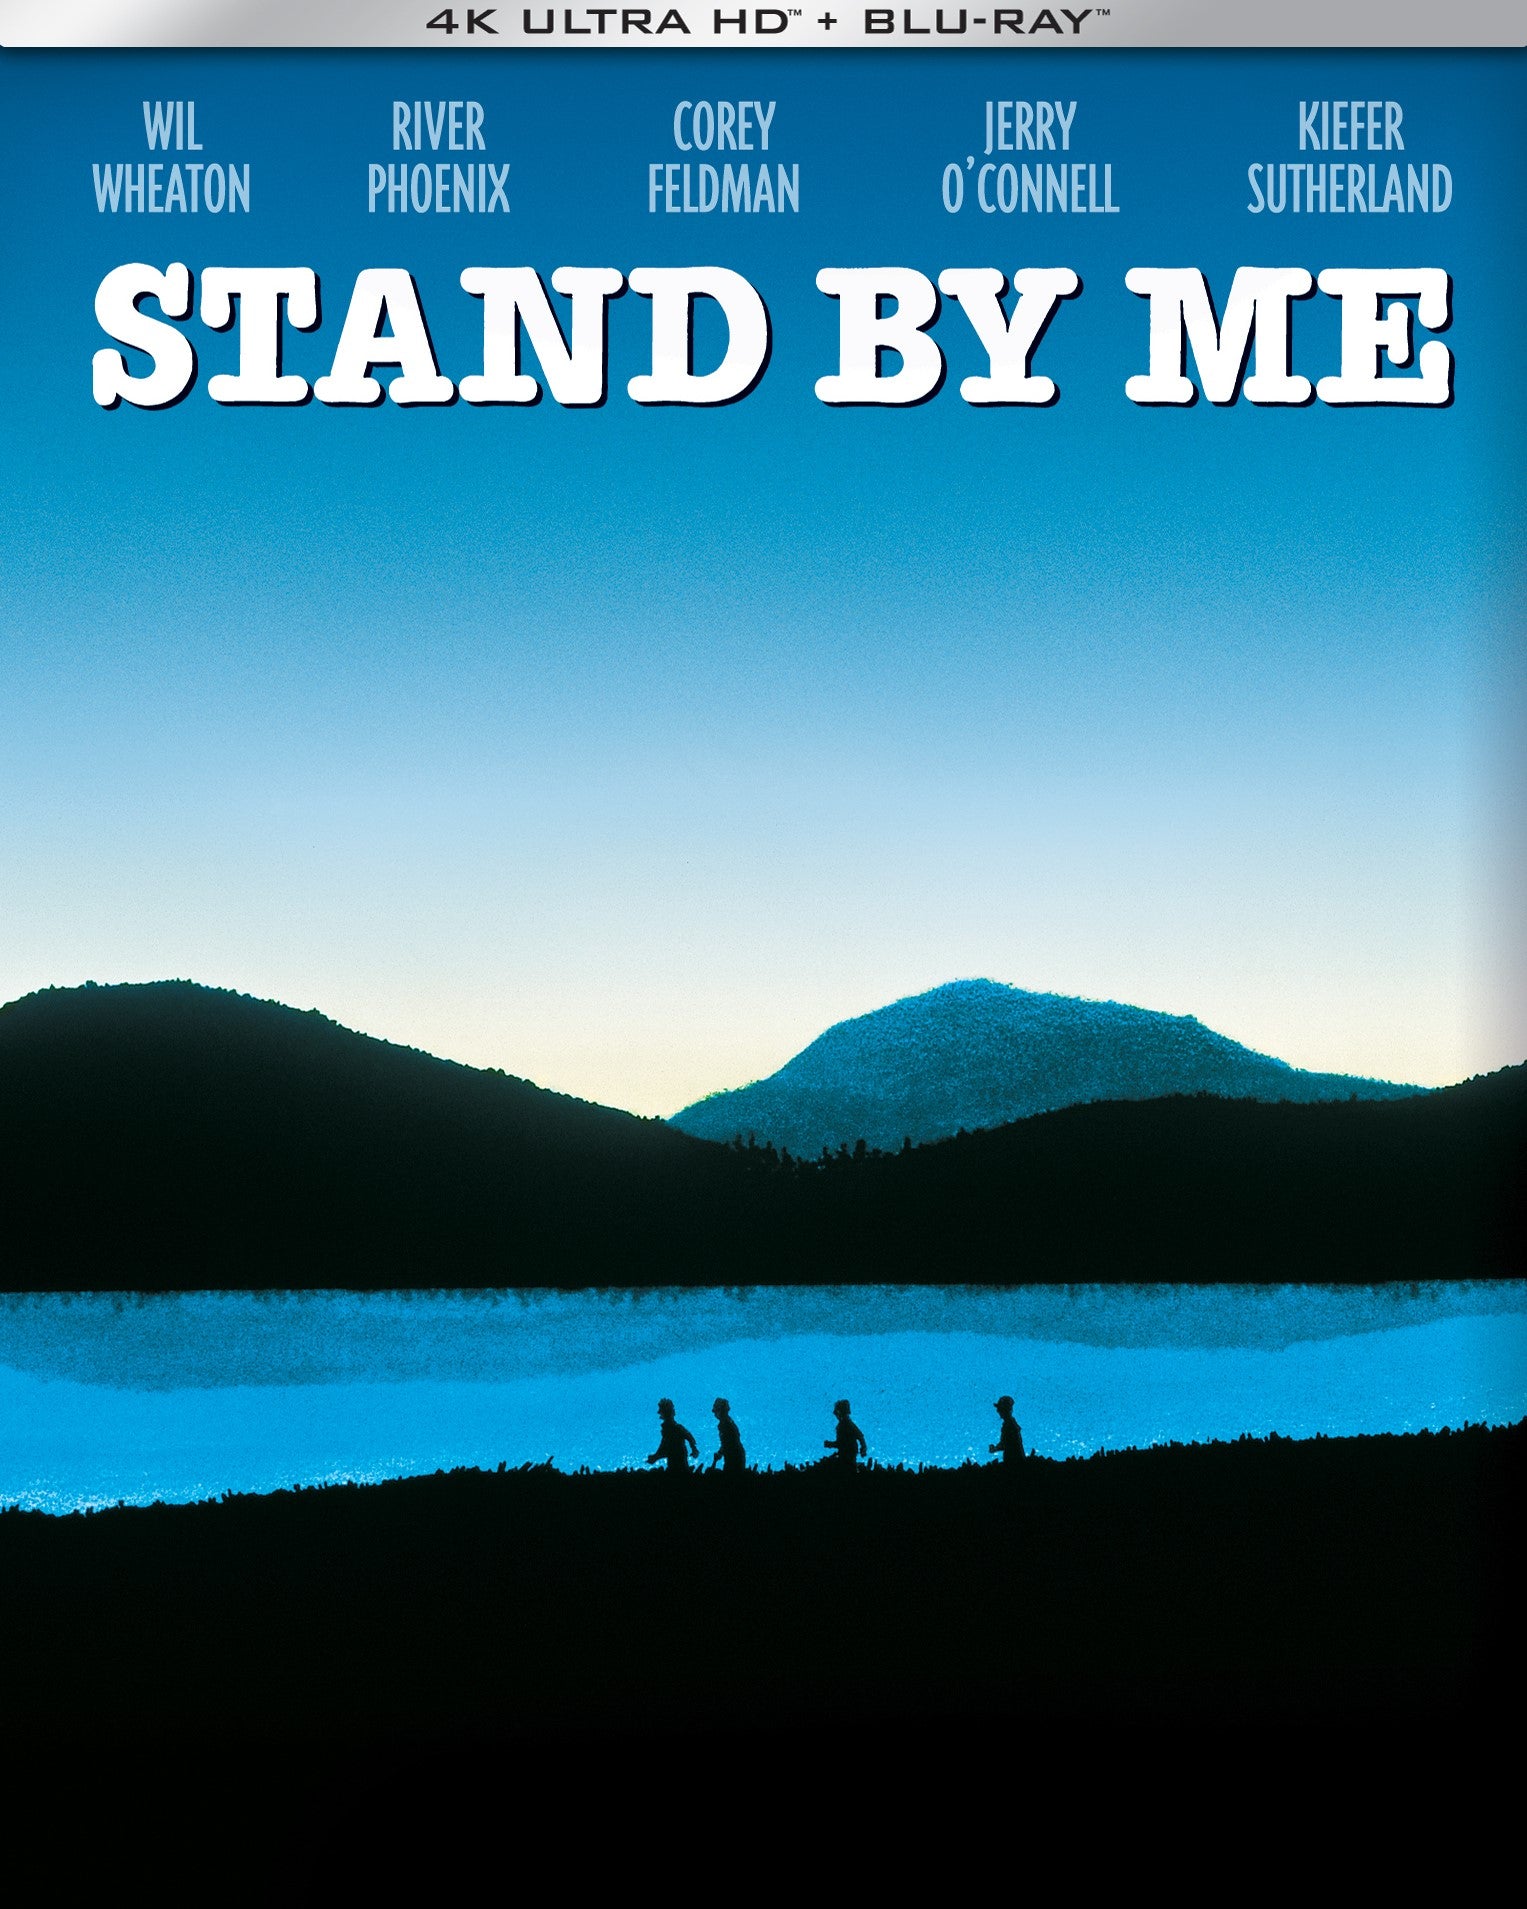 STAND BY ME (LIMITED EDITION) 4K UHD/BLU-RAY STEELBOOK